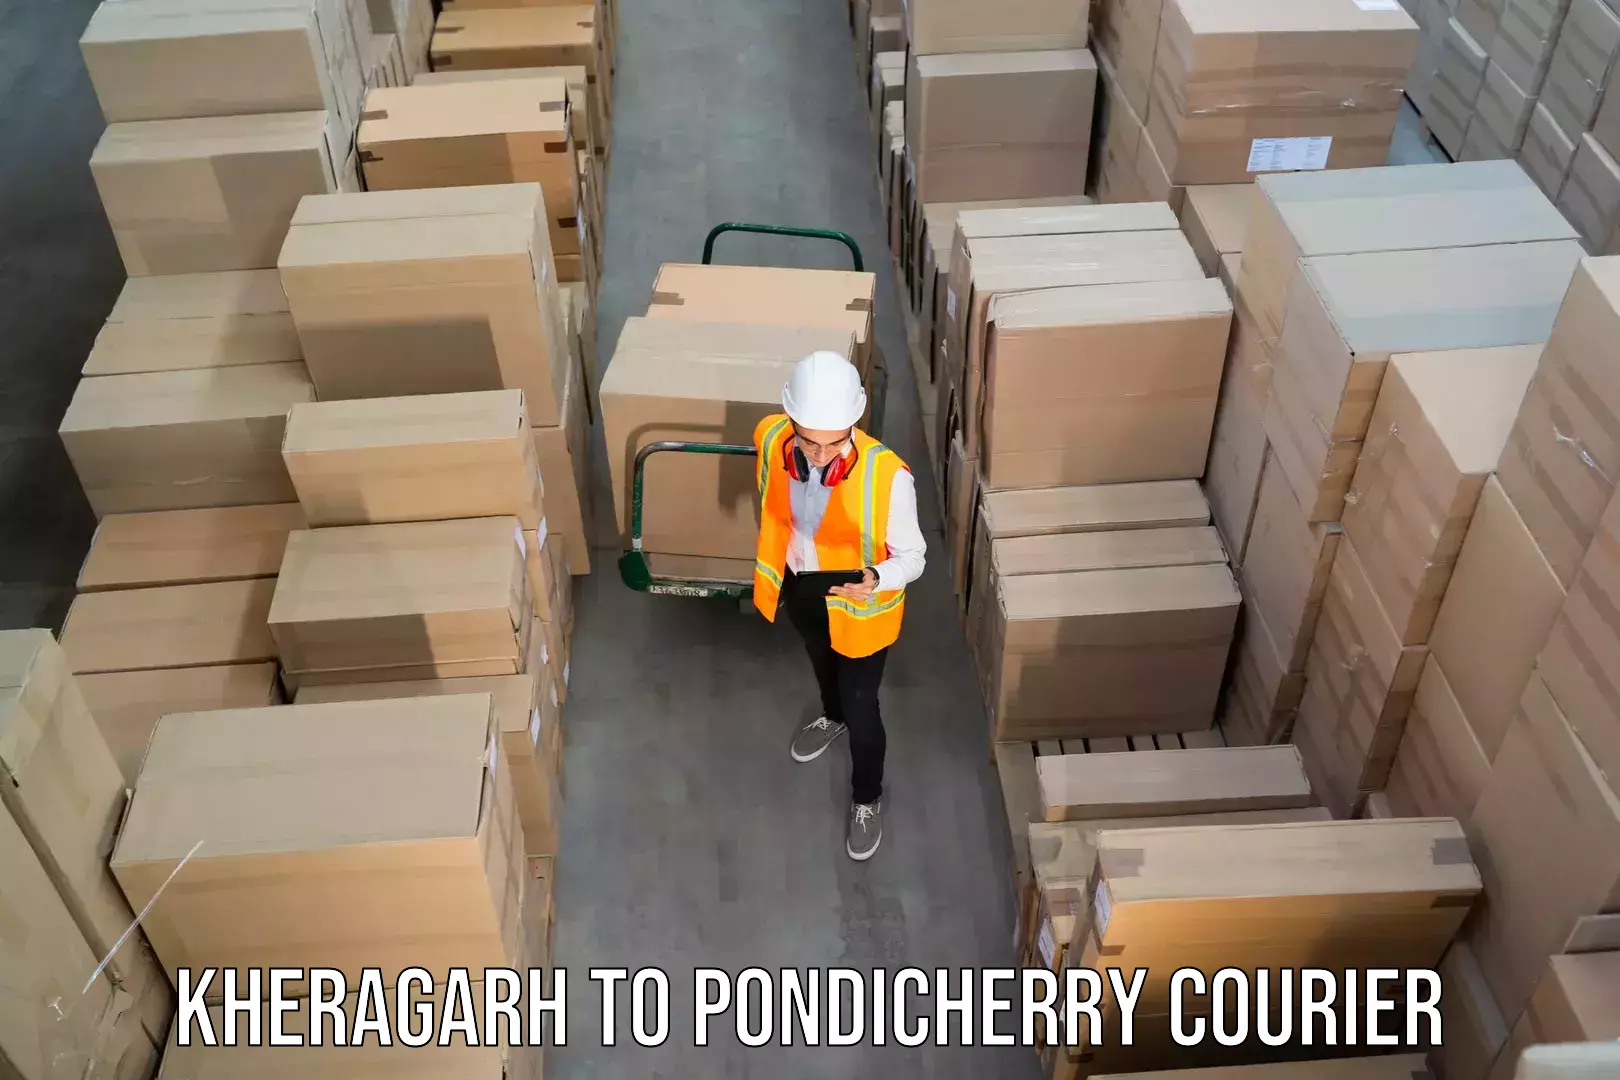 Parcel service for businesses Kheragarh to Pondicherry